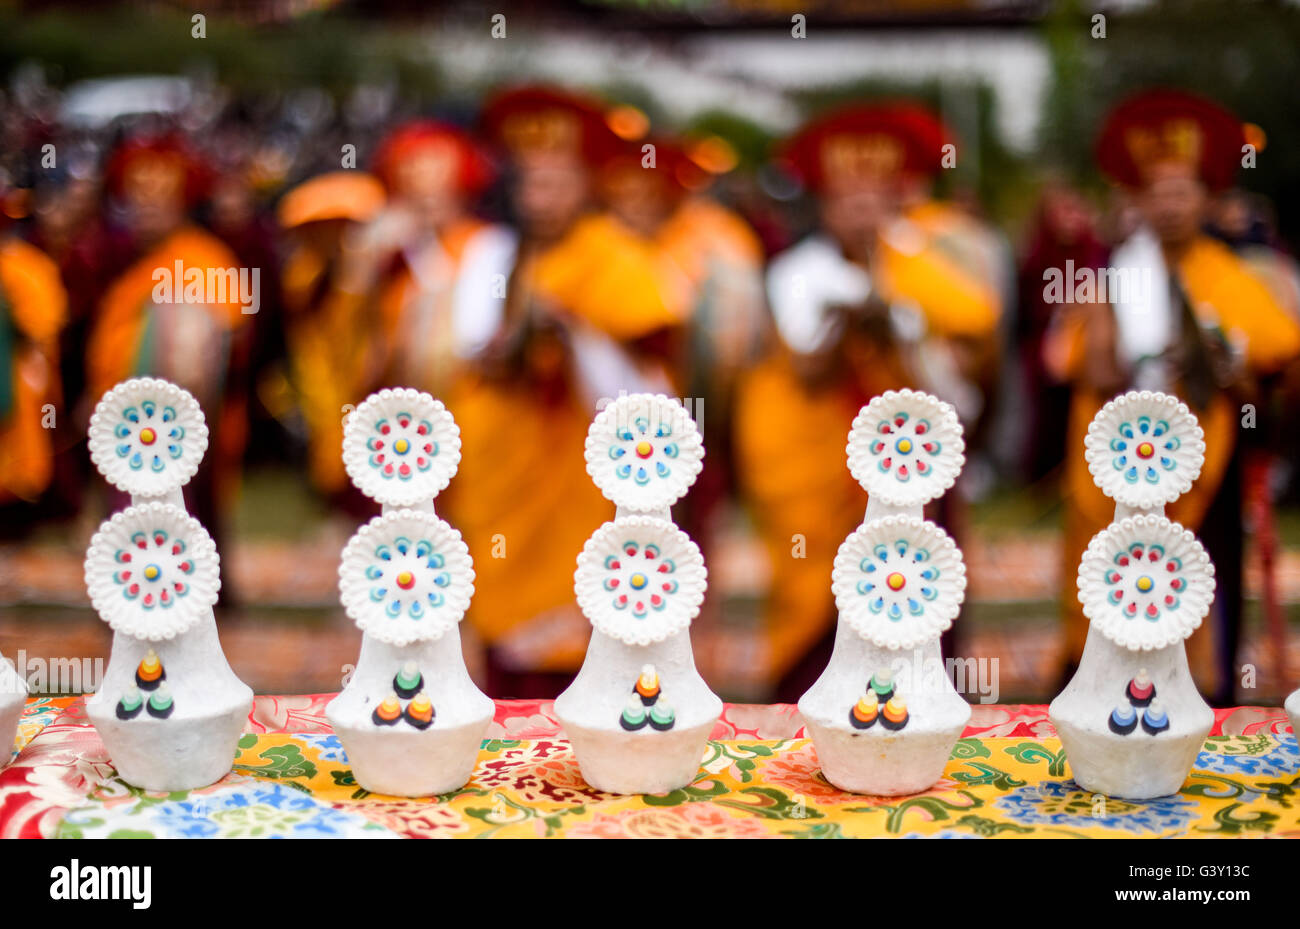 Lhasa. 16th June, 2016. Photo taken on June 16, 2016 shows Tibetan butter sculptures at a Thangka worship activity at the Tsurphu Monastery in Lhasa, capital of southwest China's Tibet Autonomous Region. An annual Thangka worship activity to show a 38-meter-by-35-meter Thangka was held at Tsurphu Monastery, a main base of the Kagyu school in Tibetan Buddhism, on Thursday, attracting many followers. The Thangka is a Tibetan Buddhist scroll-banner painting. Credit:  Purbu Zhaxi/Xinhua/Alamy Live News Stock Photo